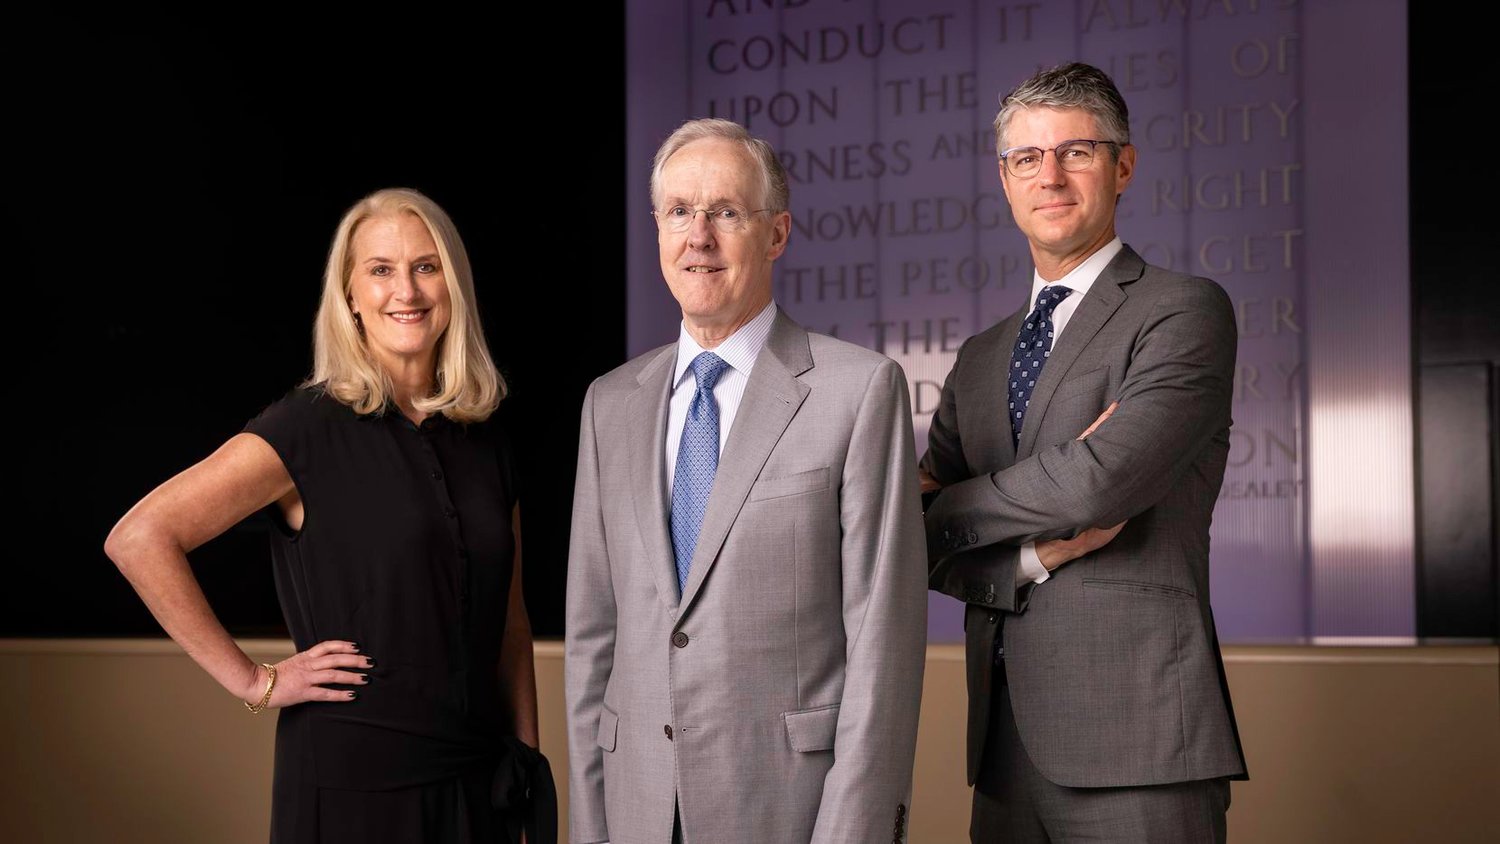 From left: Katy Murray, newly named president of DallasNews Corporation; Robert W. Decherd, executive chairman; and new CEO Grant Moise. (Juan Figueroa / The Dallas Morning News)